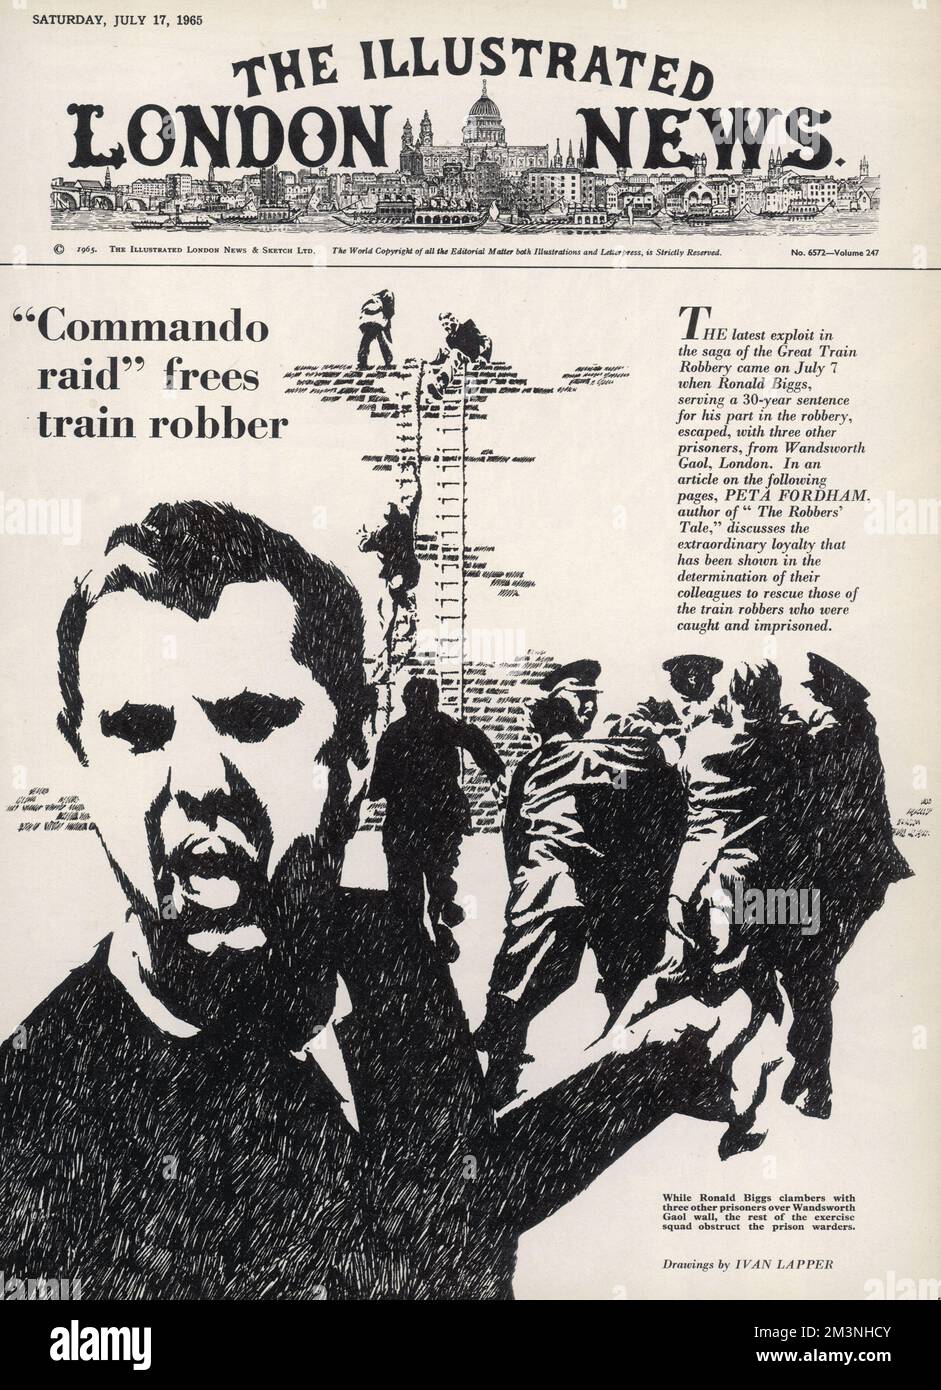 Front page of The Illustrated London News reporting on the latest episode in the Great Train Robbery saga. As Ronald Biggs clambers with three other prisoners over Wandsworth Gaol wall, the rest of the exercise squad obstruct the prison wardens. Following his escape, Ronnie Biggs fled to Brazil where he fathered a child and successfully evaded extradition by the authorities. In 2001, Biggs voluntarily returned to the UK to serve the remainer of his sentance, but following ill health was released from custody the day before his 80th birthday, on 'compassionate grounds'.     Date: 1965 Stock Photo